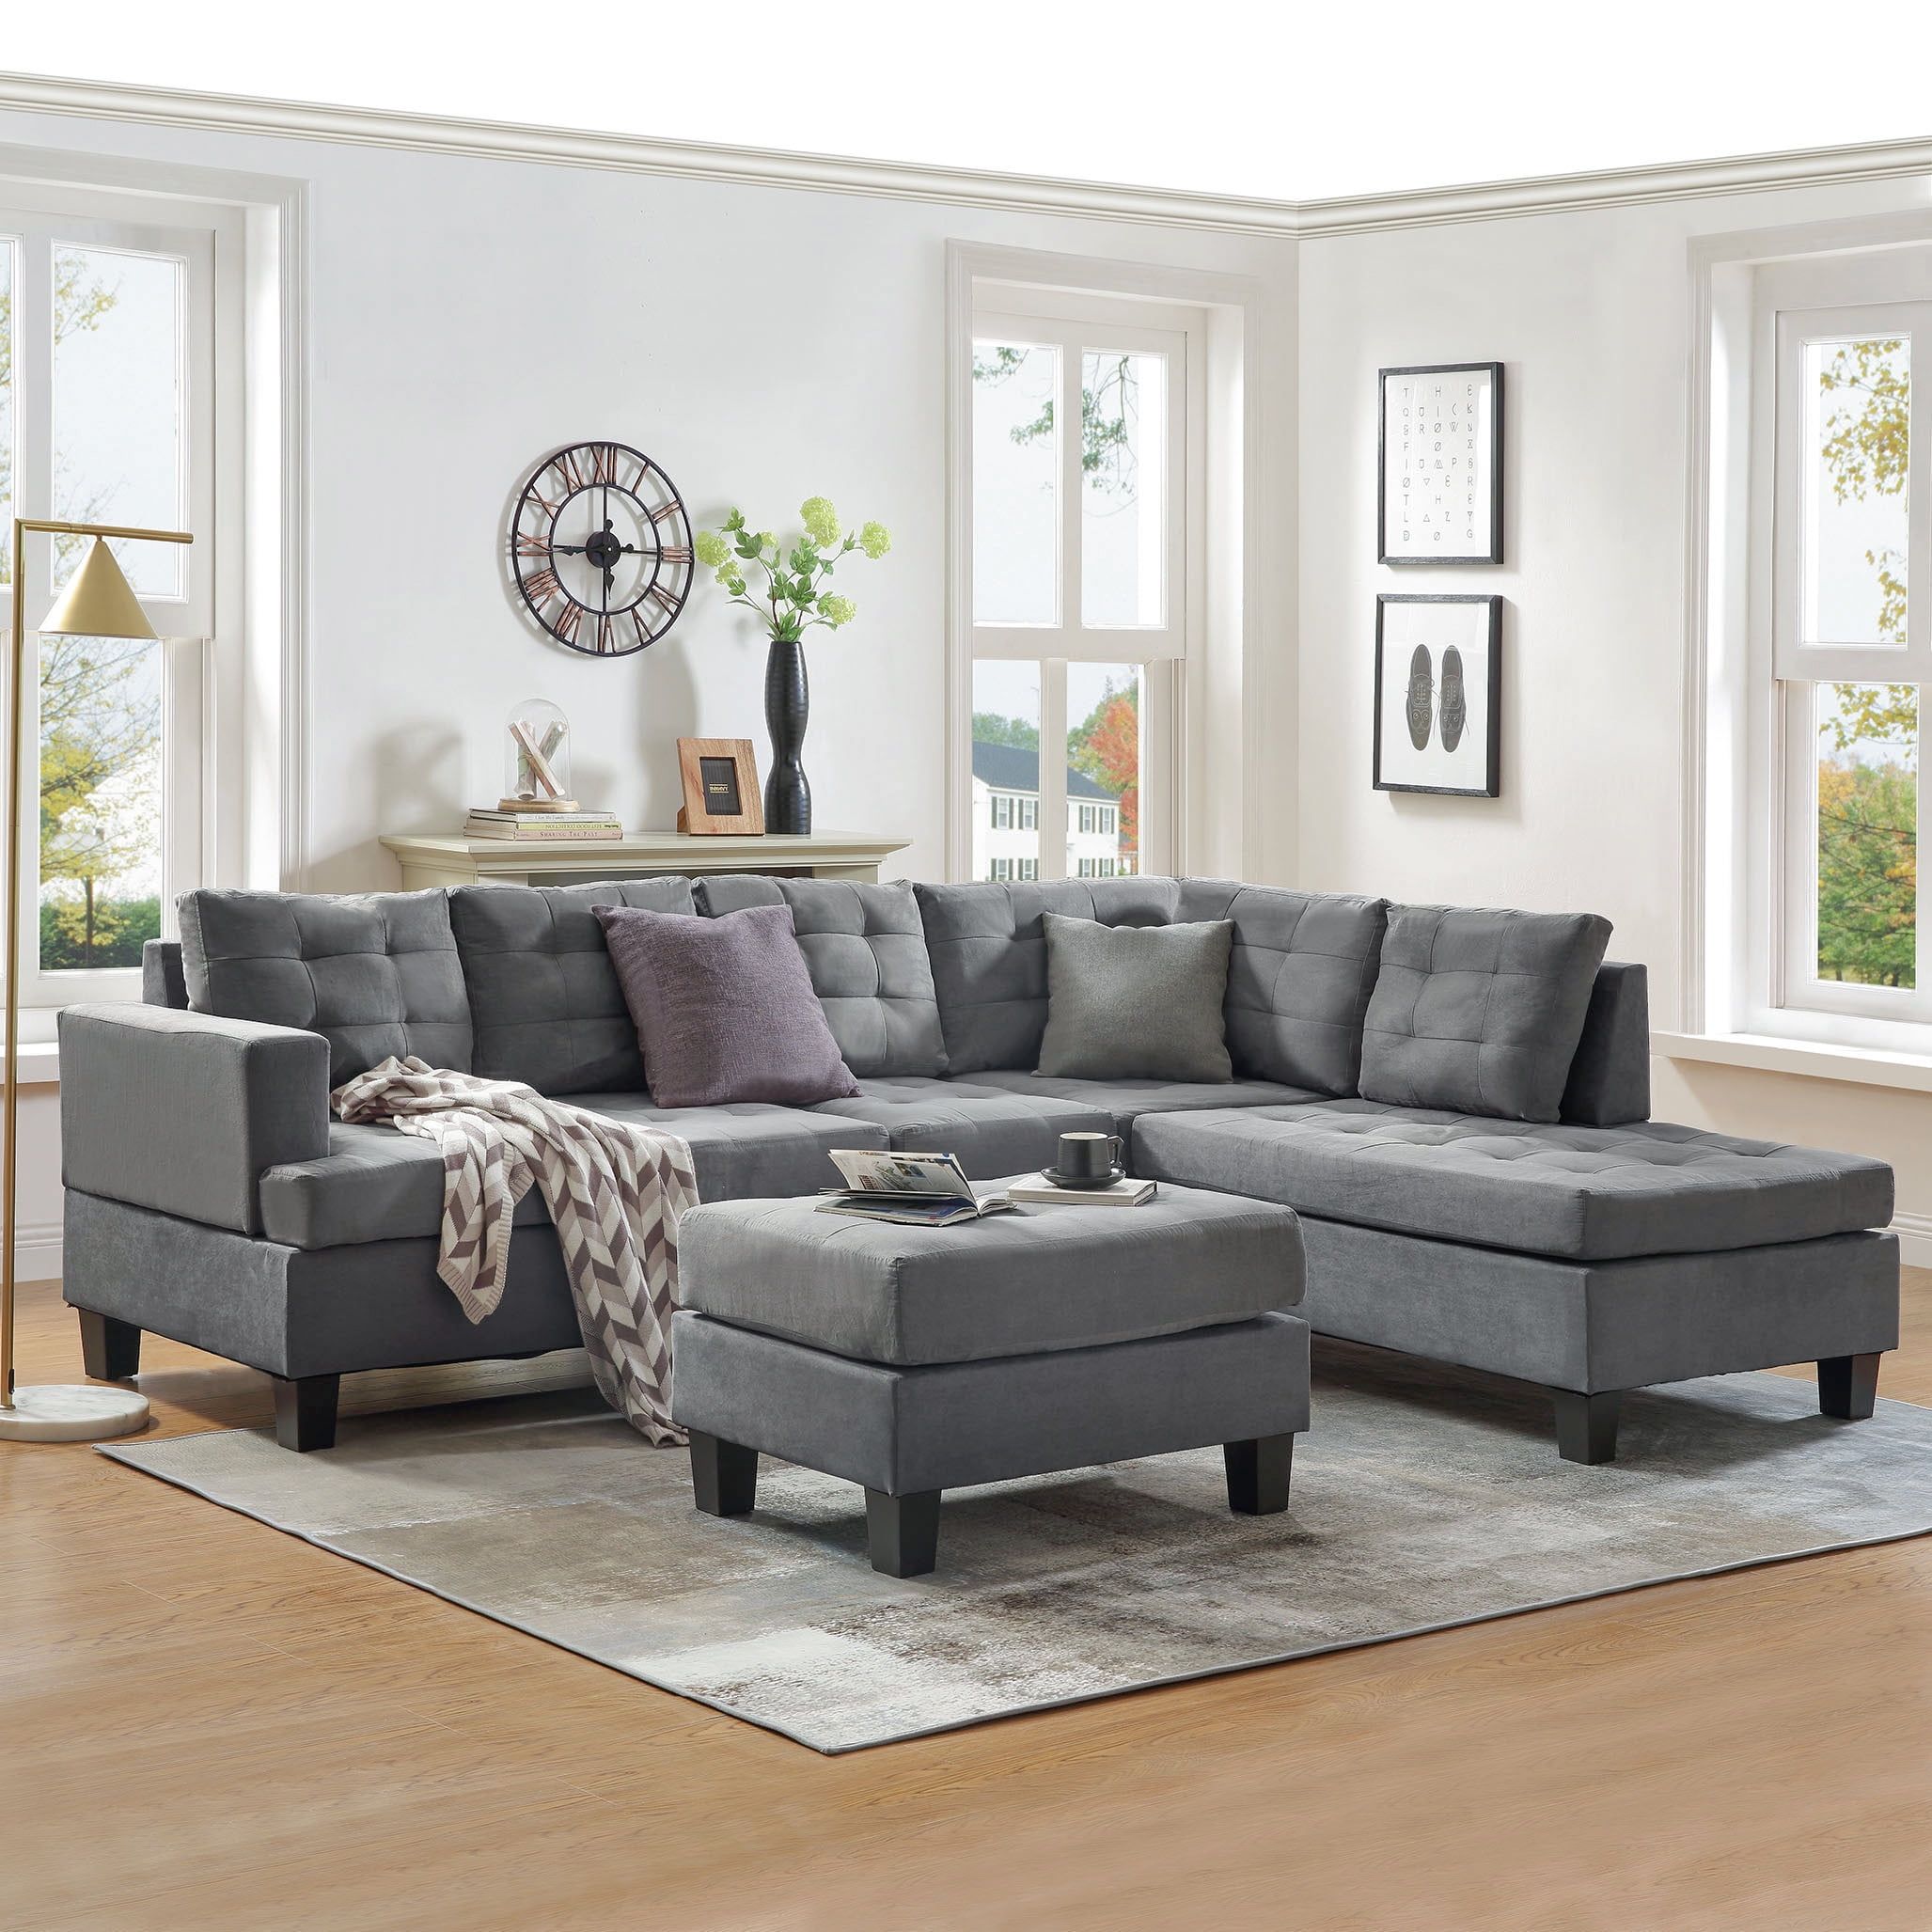 Urhomepro L Shape Mid Century Sofa, 105"w Modern Sectional Sofa With Throughout Modern L Shaped Sofa Sectionals (View 14 of 20)